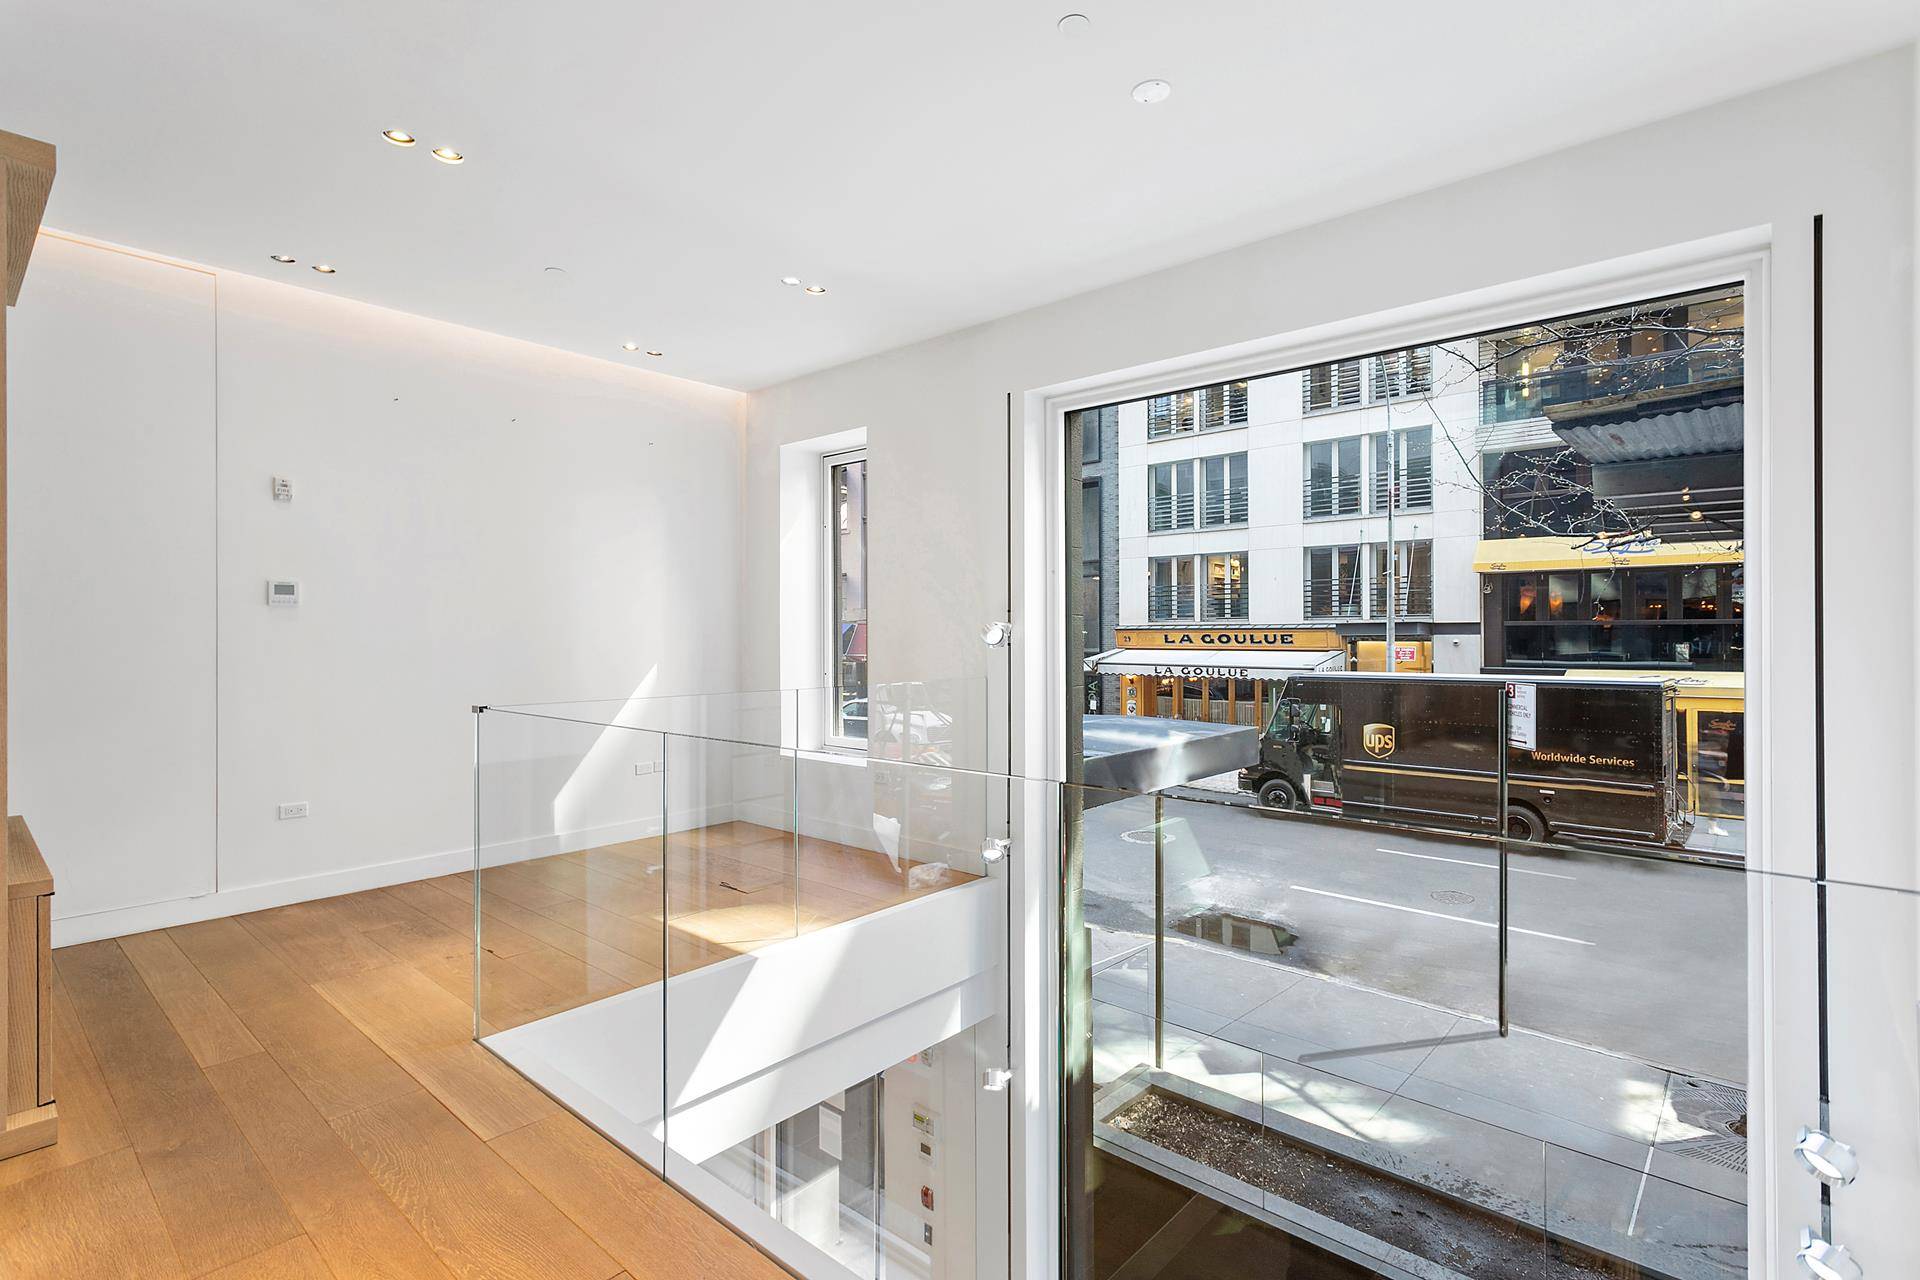 34 East 61st Street is a 21' wide, 5 story commercial residential townhouse built full on a 100' lot in the C5 1 zoning district off Madison Avenue.